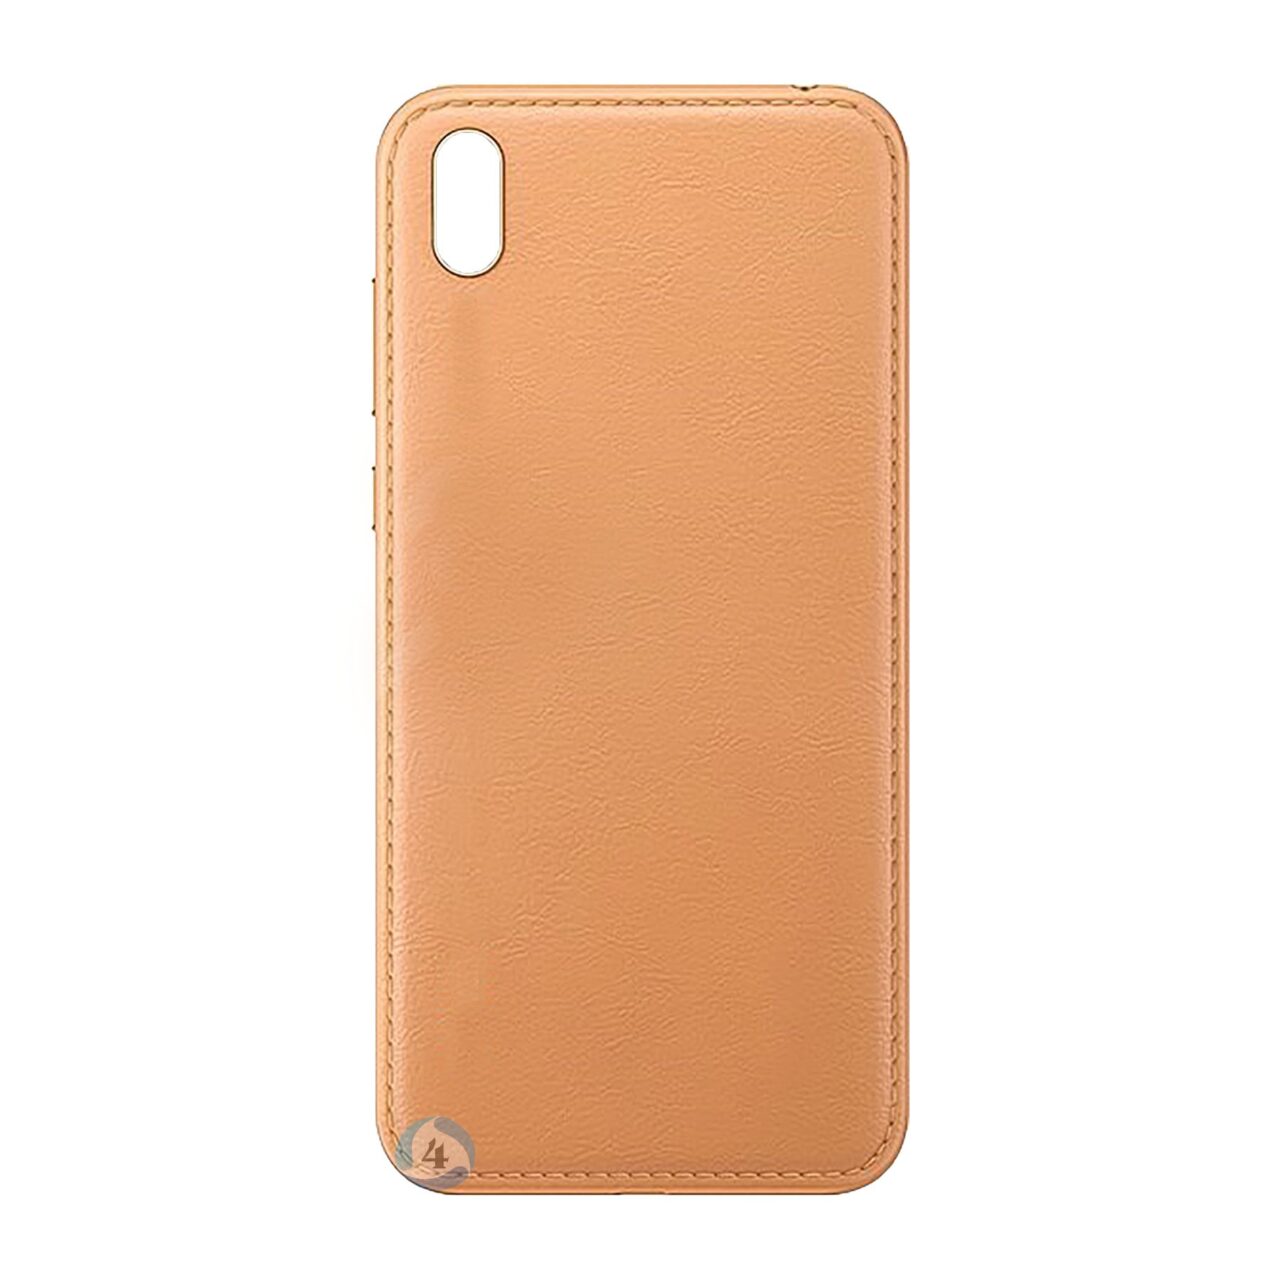 Huawei Y5 2019 backcover brown